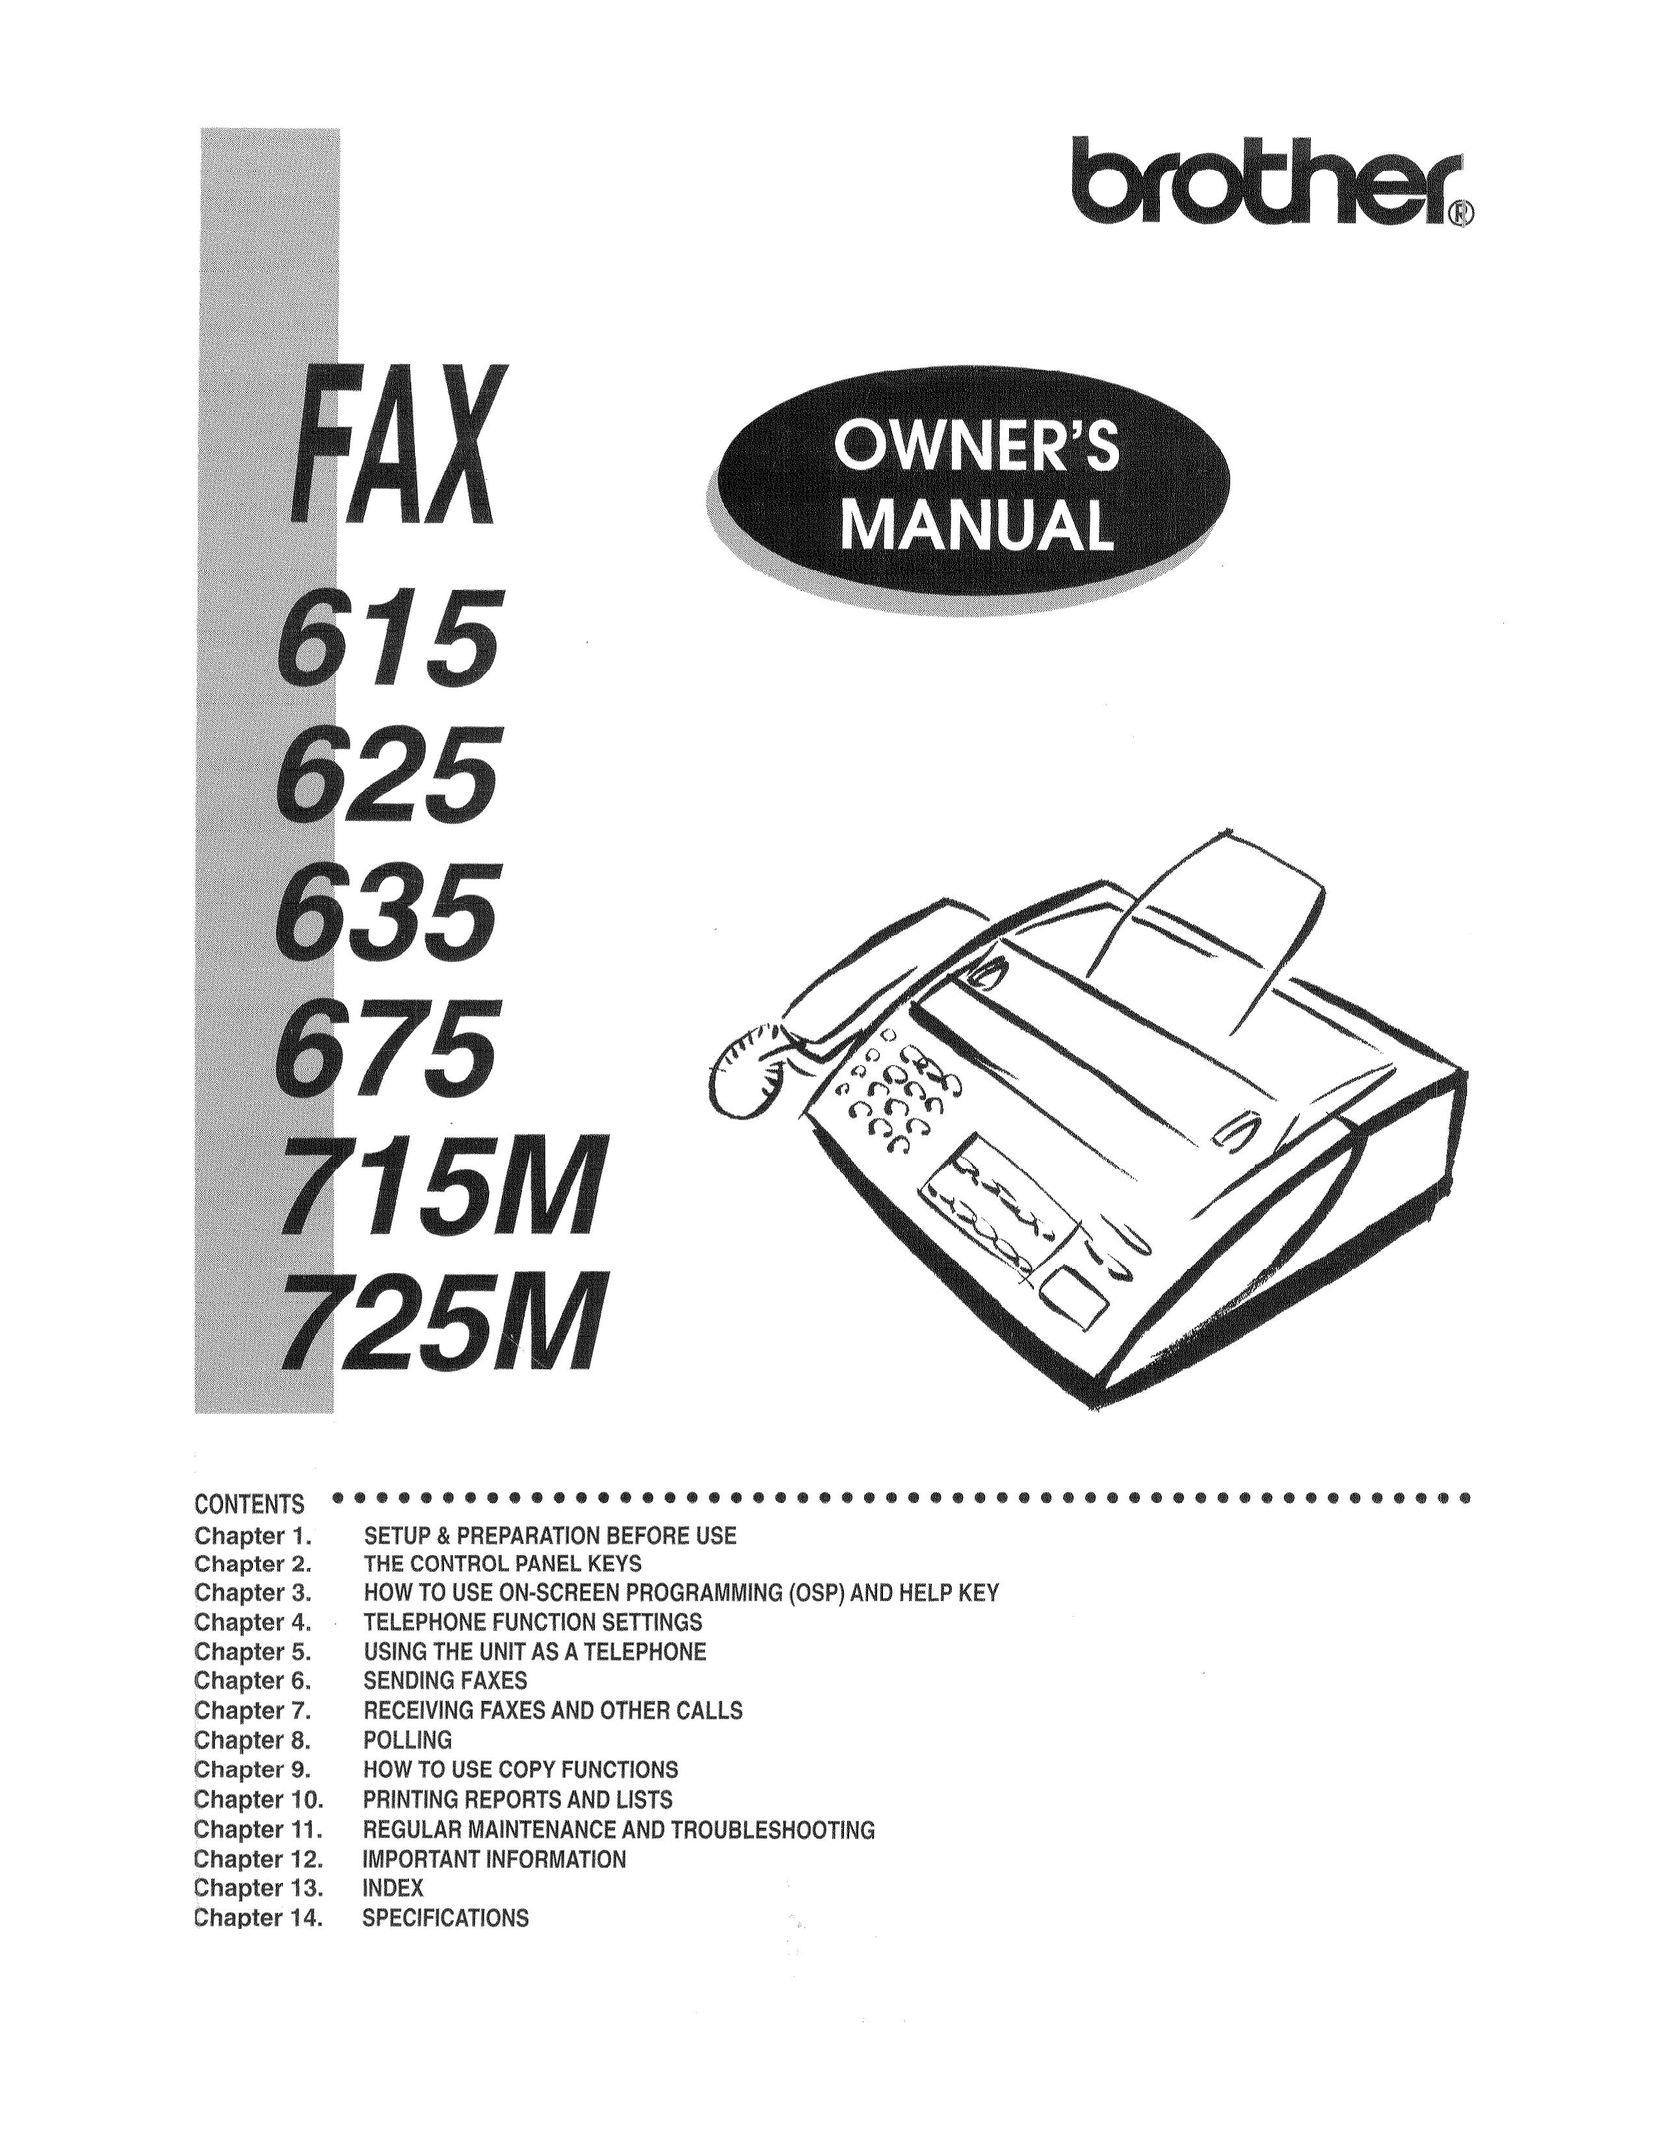 Brother 615 Fax Machine User Manual